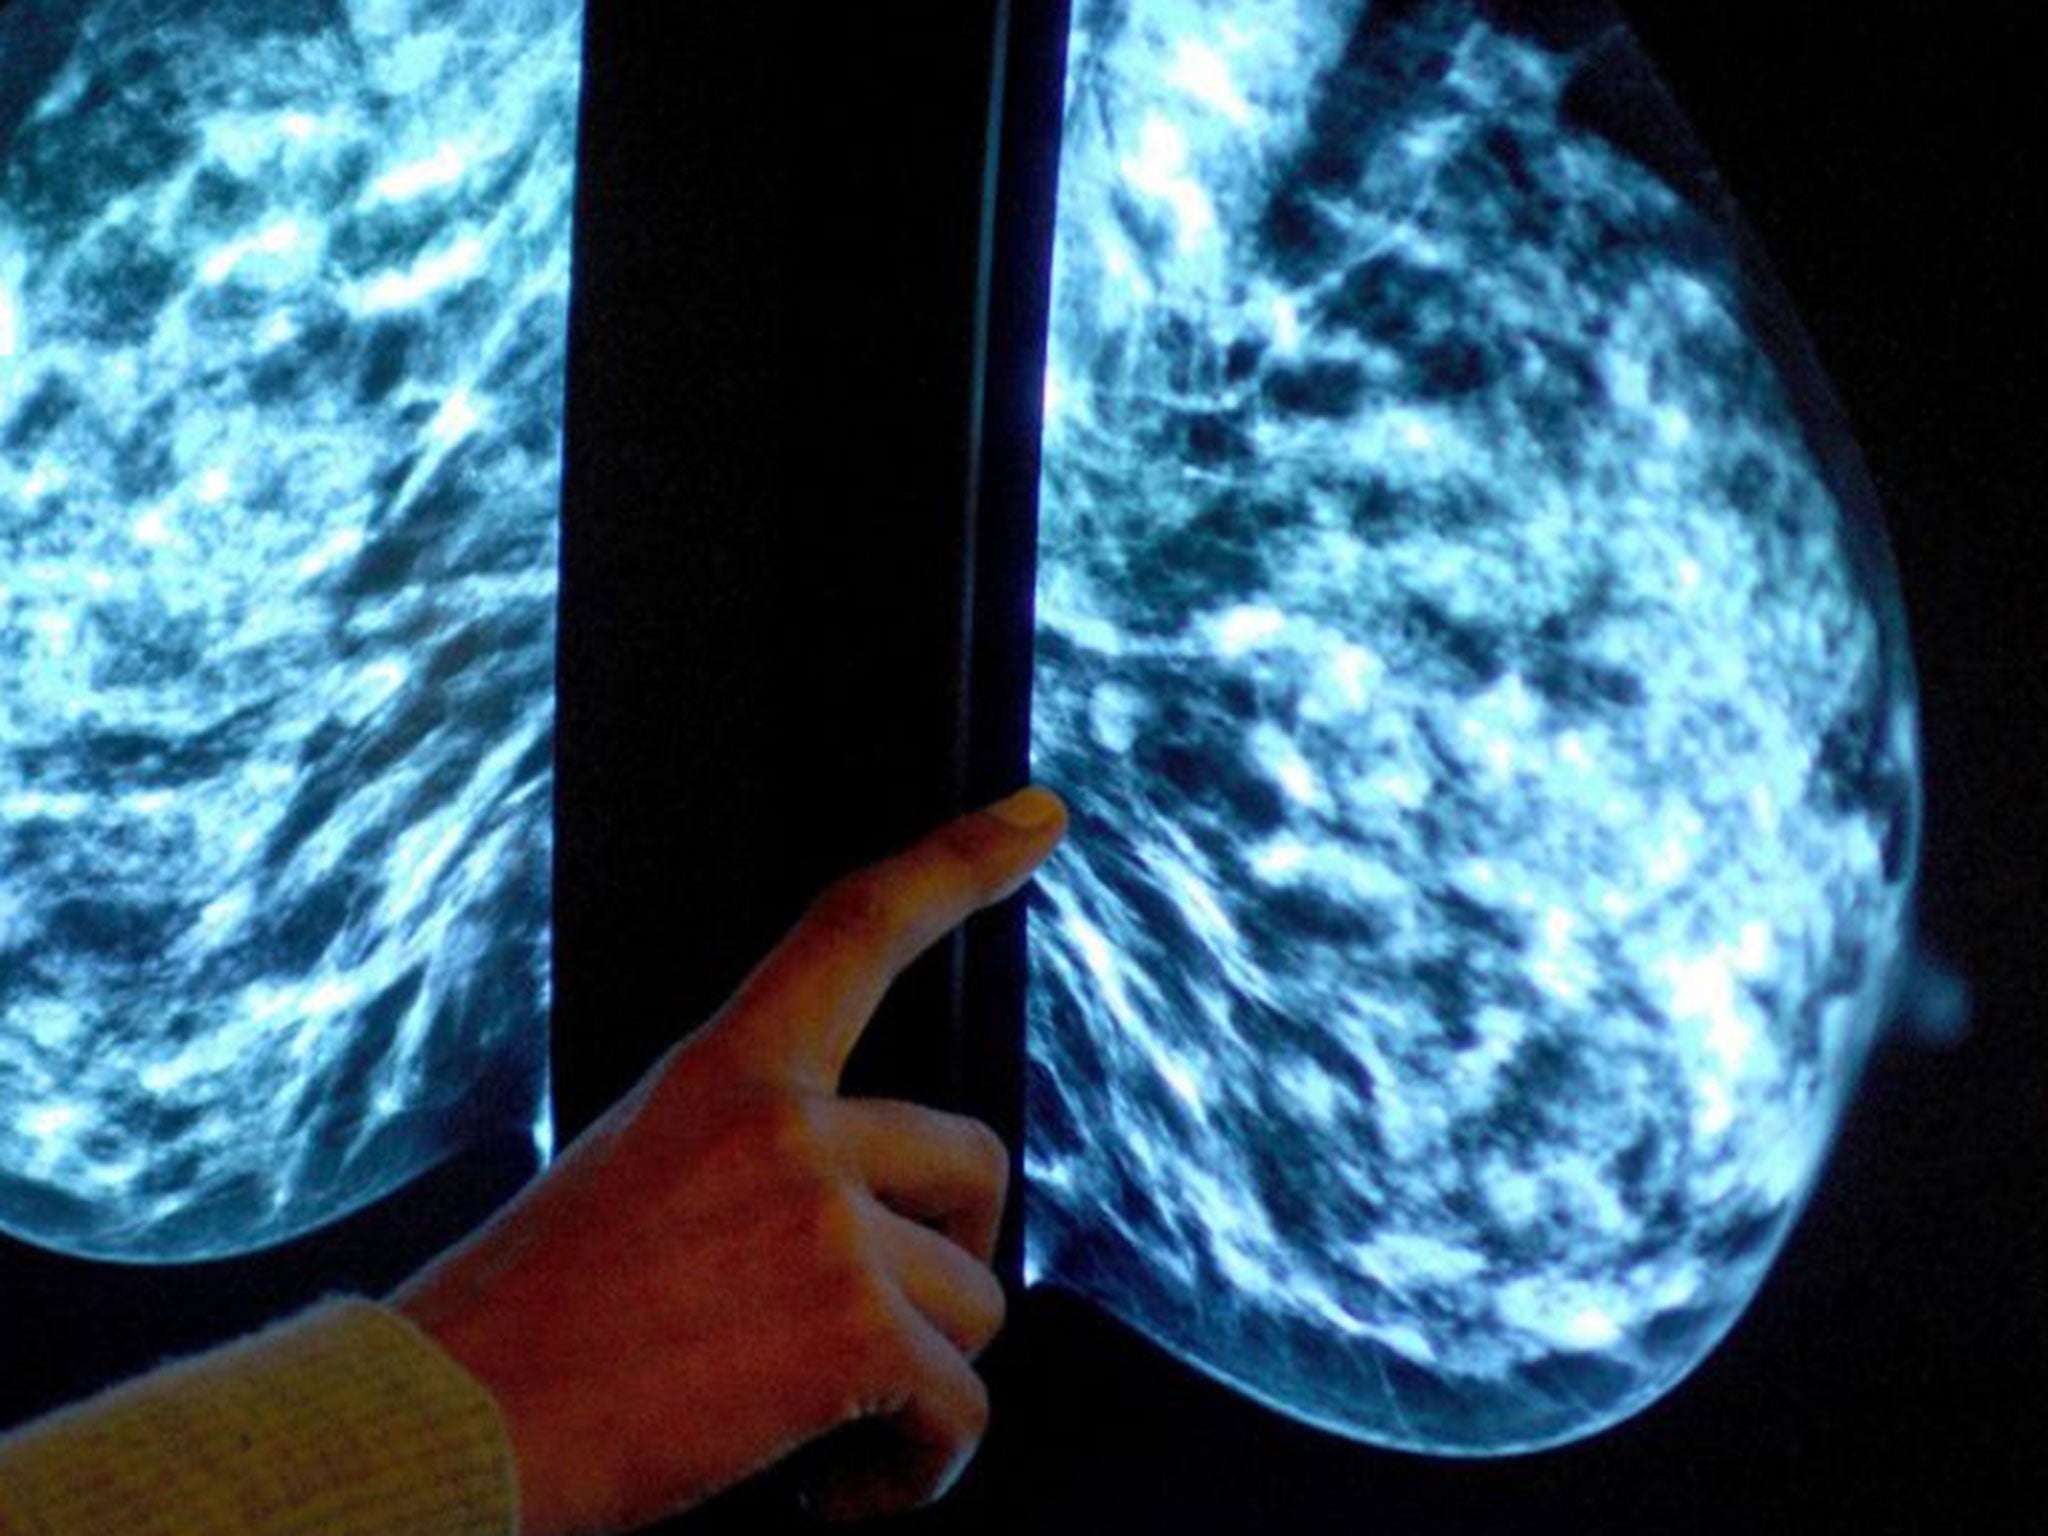 File photo of a mammogram. Tens of thousands of people diagnosed with breast cancer could benefit from an "innovative" new type of radiotherapy delivered during surgery instead of through a traditional course of treatment.